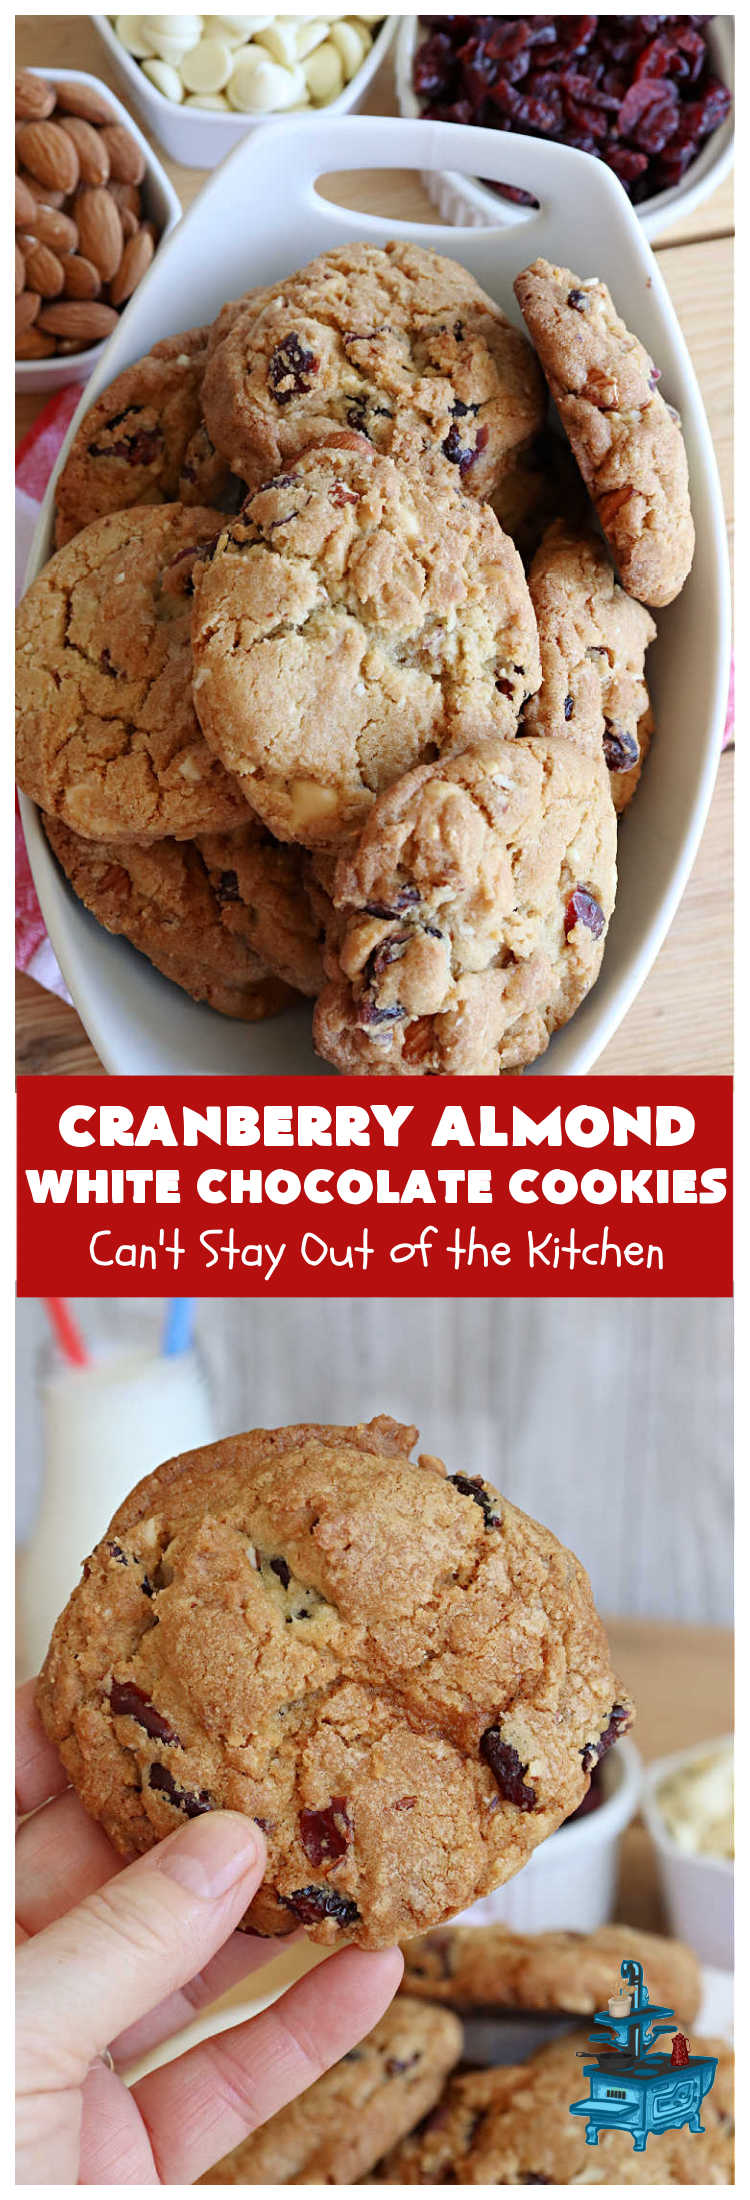 Cranberry Almond White Chocolate Cookies | Can't Stay Out of the Kitchen | these delectable #cookies start from a favorite #ChocolateChipCookie #recipe but use #WhiteChocolateChips, #almonds & dried #cranberries. They're perfect for #holiday parties, potlucks, #tailgating & entertaining of any kind. #chocolate #WhiteChocolate #craisins #dessert #CranberryDessert #ChocolateDessert #AlmondDessert #HolidayDessert #ChristmasCookieExchange #CranberryAlmondWhiteChocolateCookies